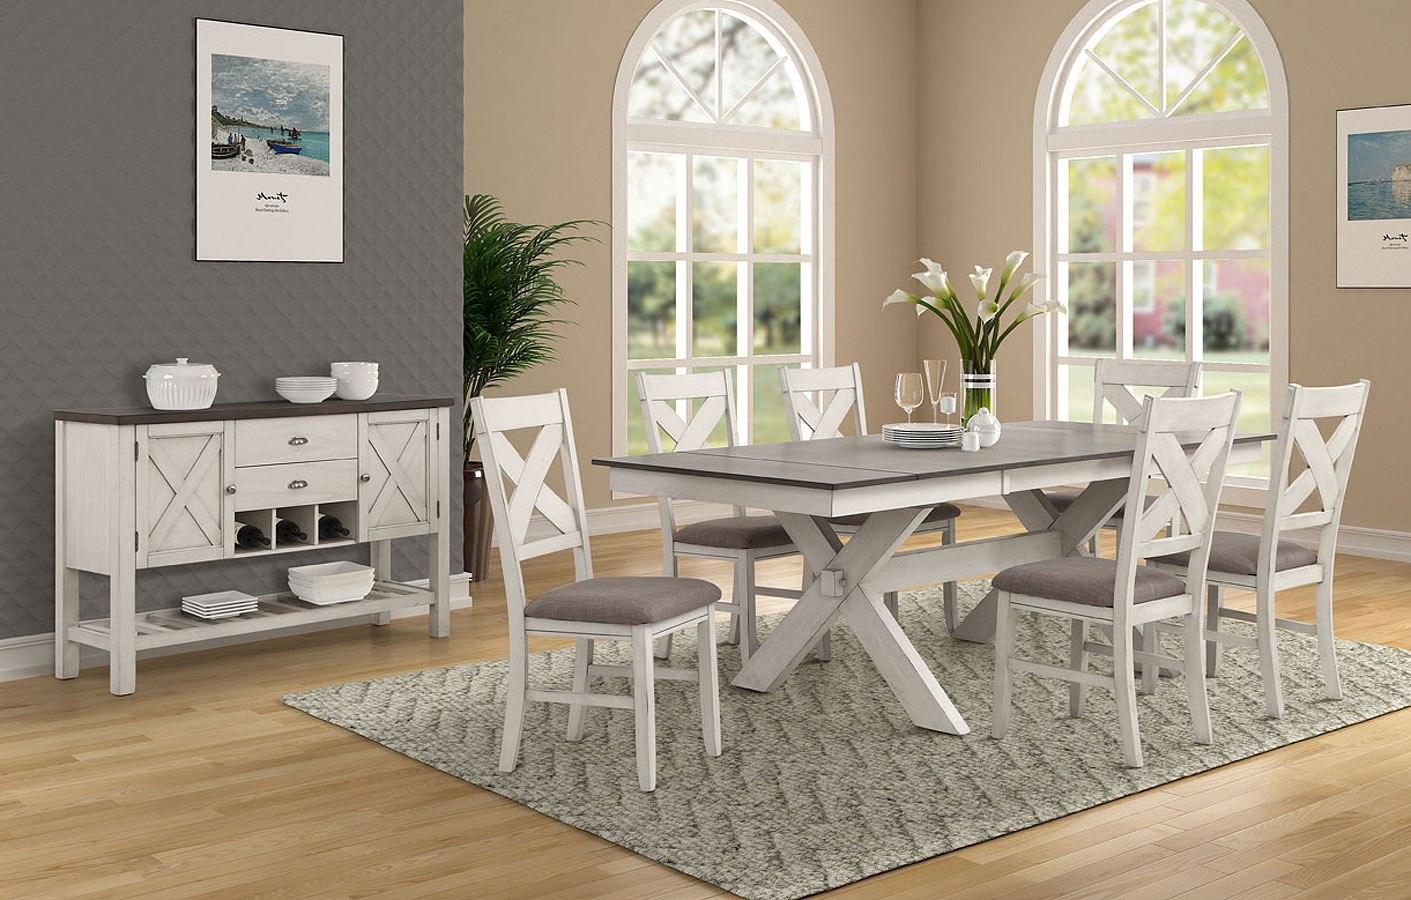 Transitional, Farmhouse Dining Chair Set HOMESTEAD 5812-510 5812-510 in White, Brown Fabric